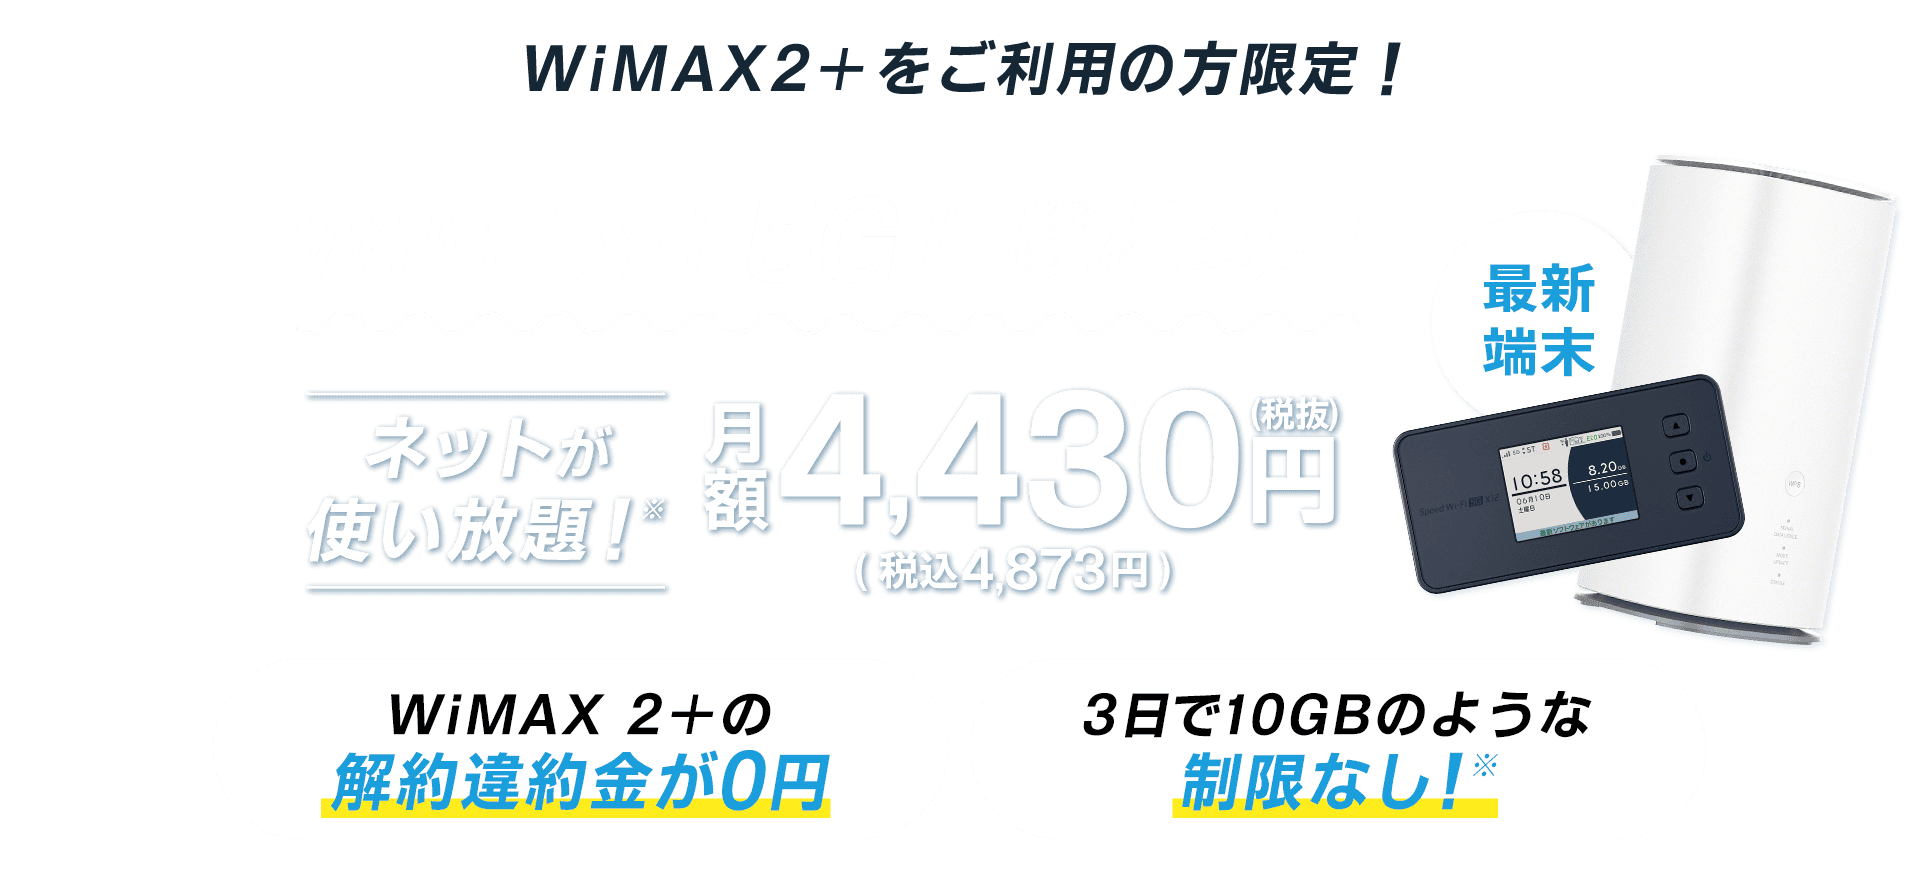 WiMAX 2+をご利用の方限定！WiMAX +5Gに機種変更